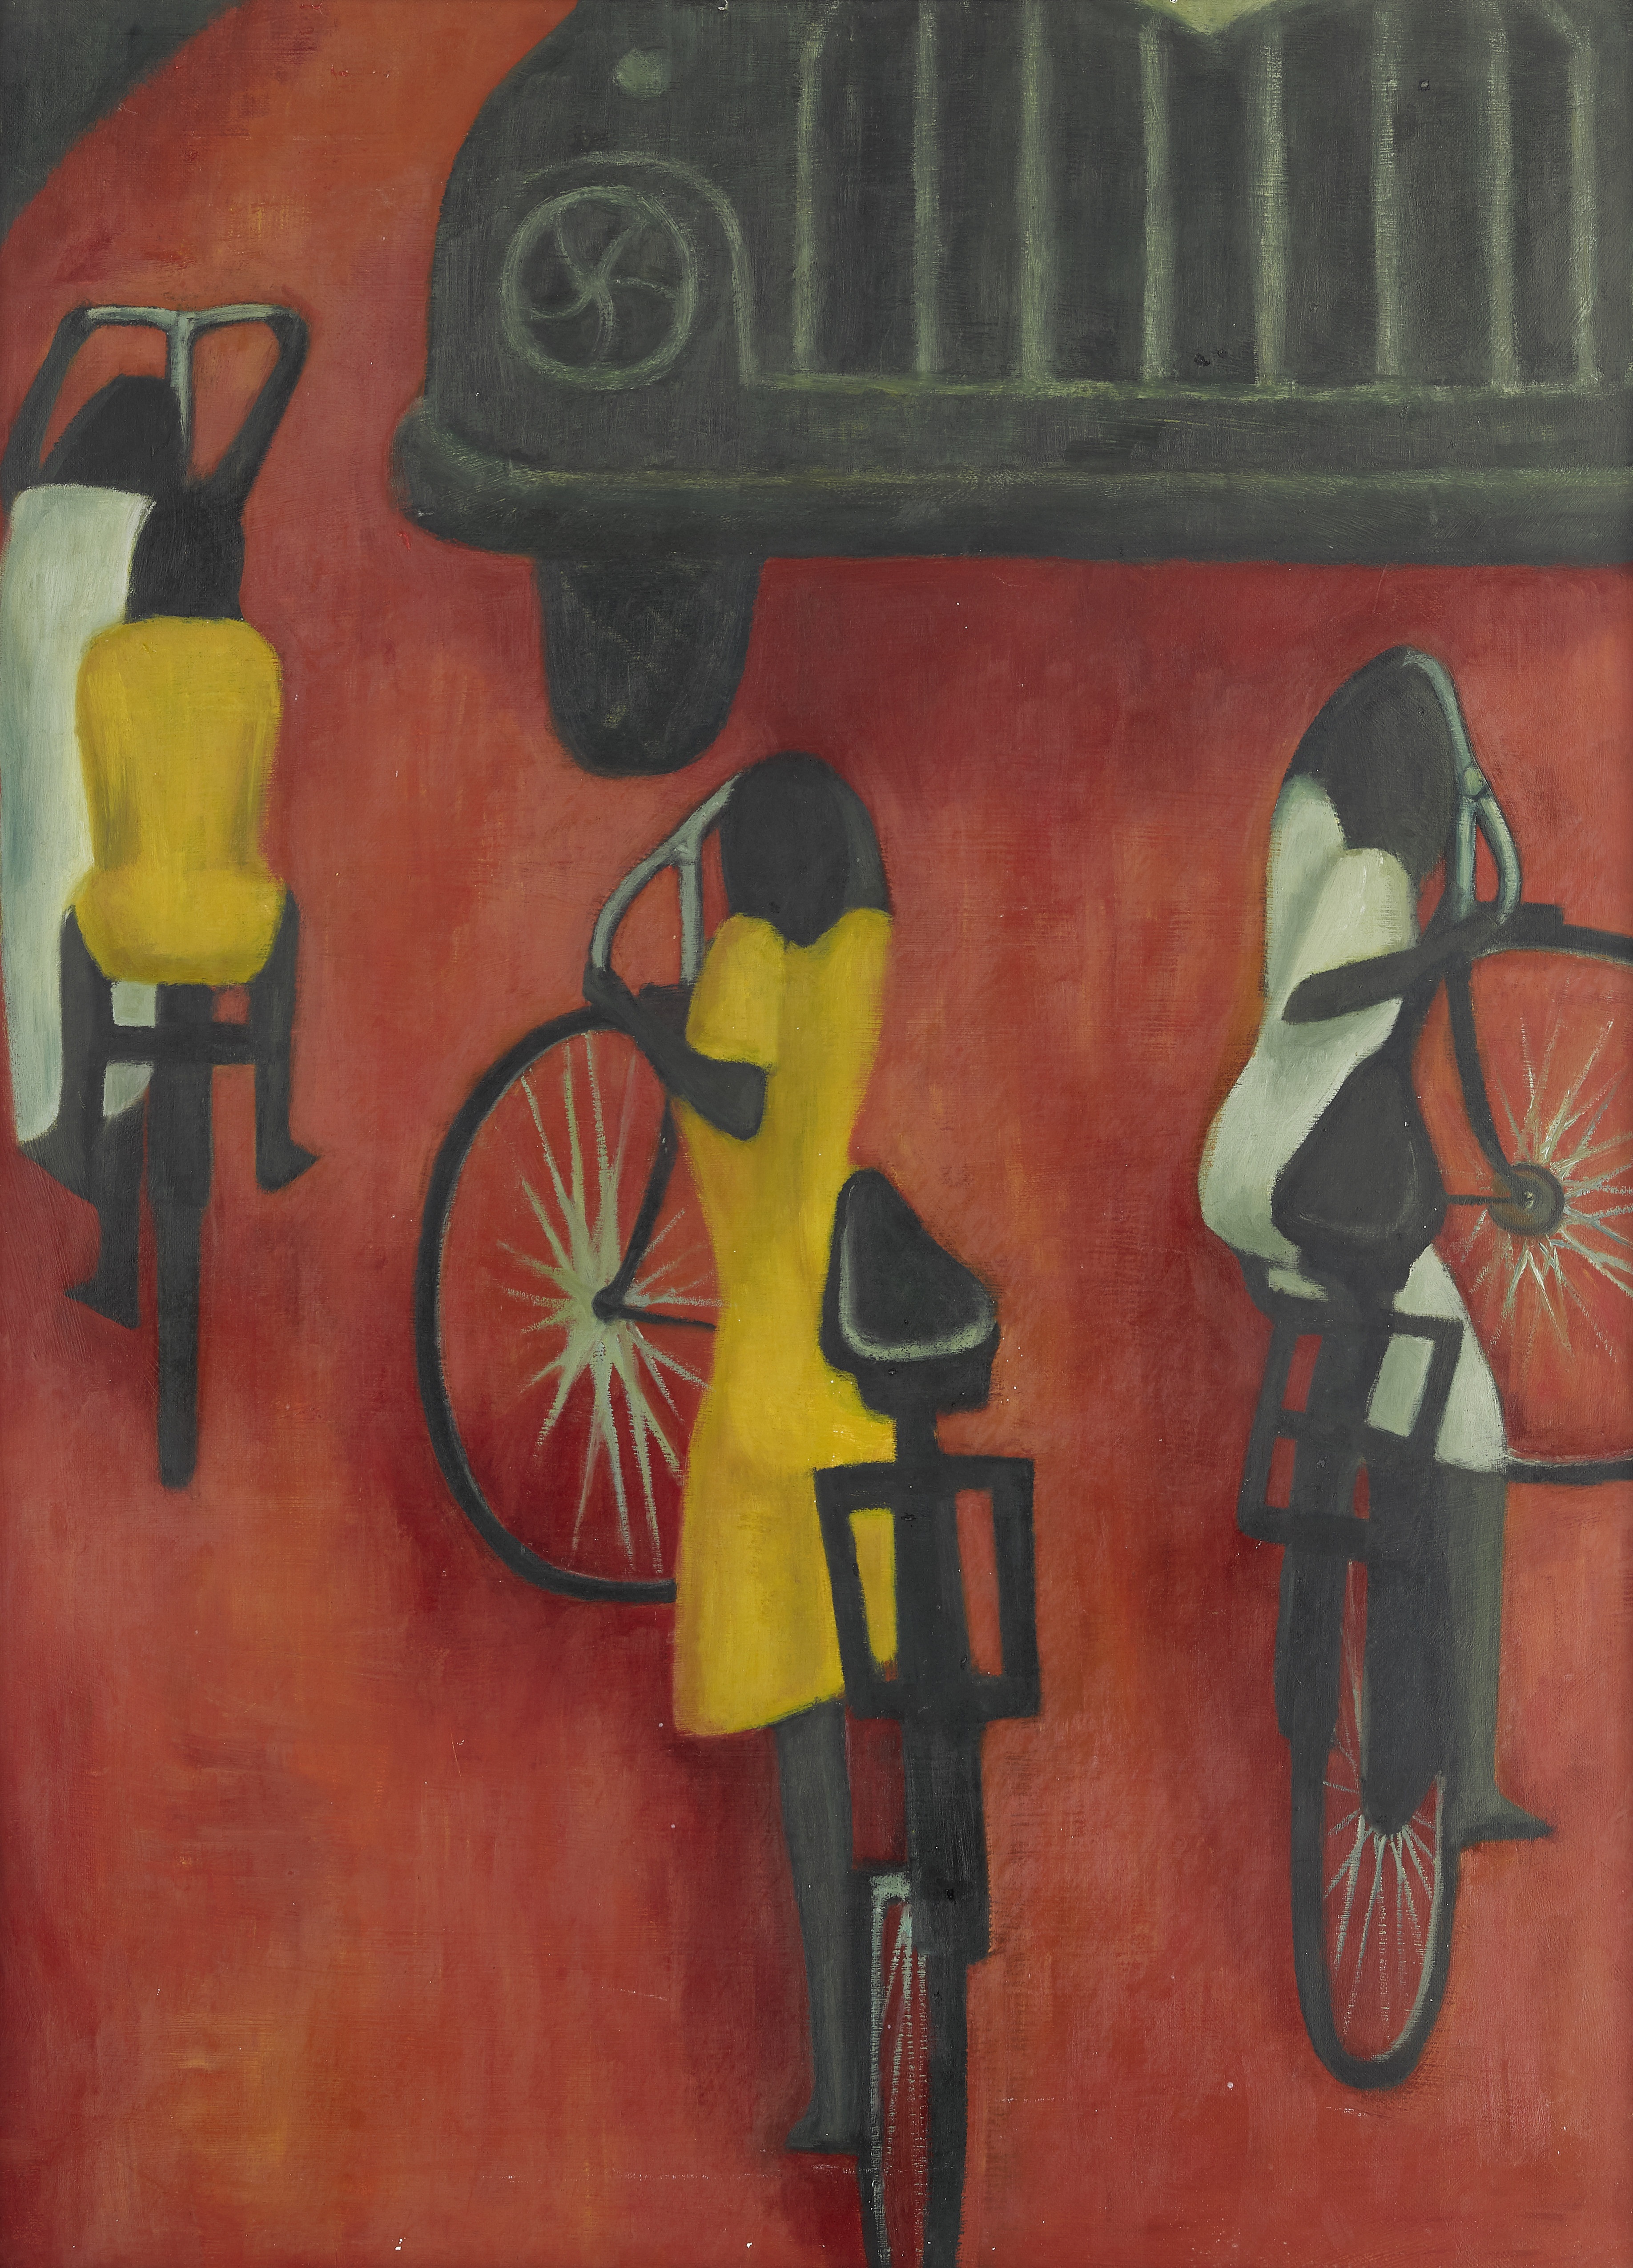 Children on Cycles by Demas Nwoko features a black truck at the top, with four black children, some in white and some in yellow on a red background. The four children are streamlined and abstract, with heads but no faces.